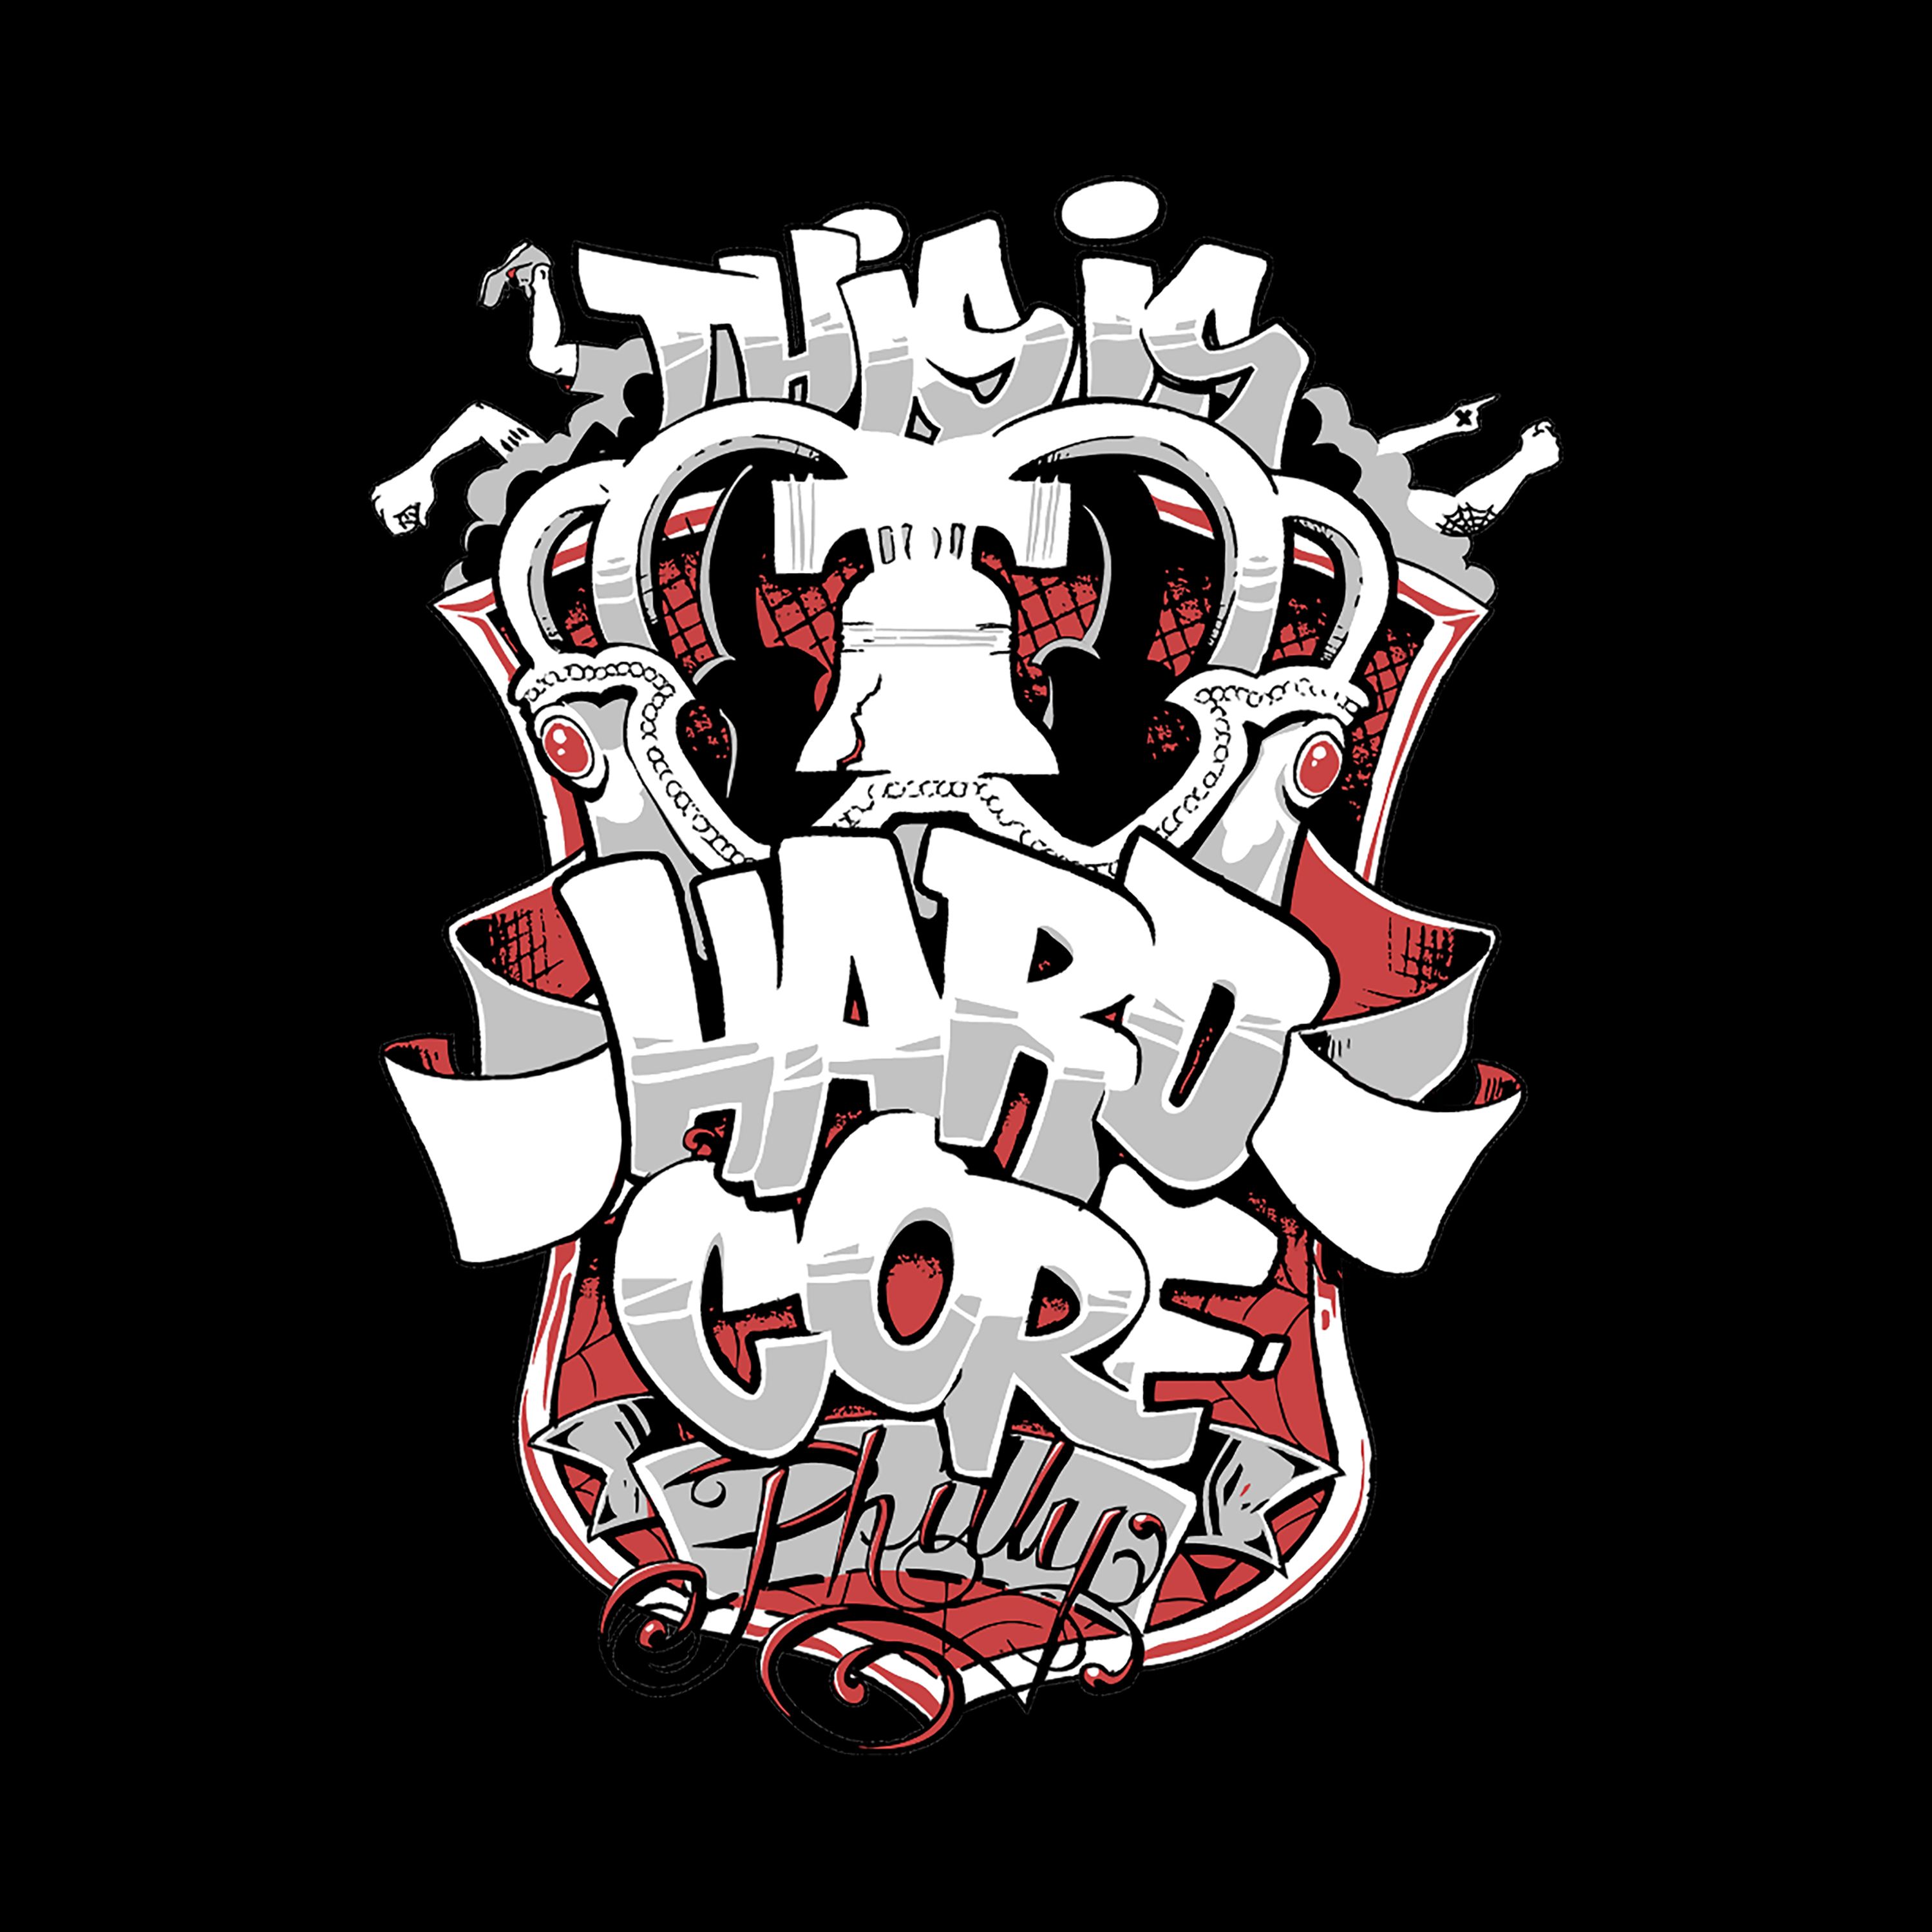 This Is Hardcore Podcast